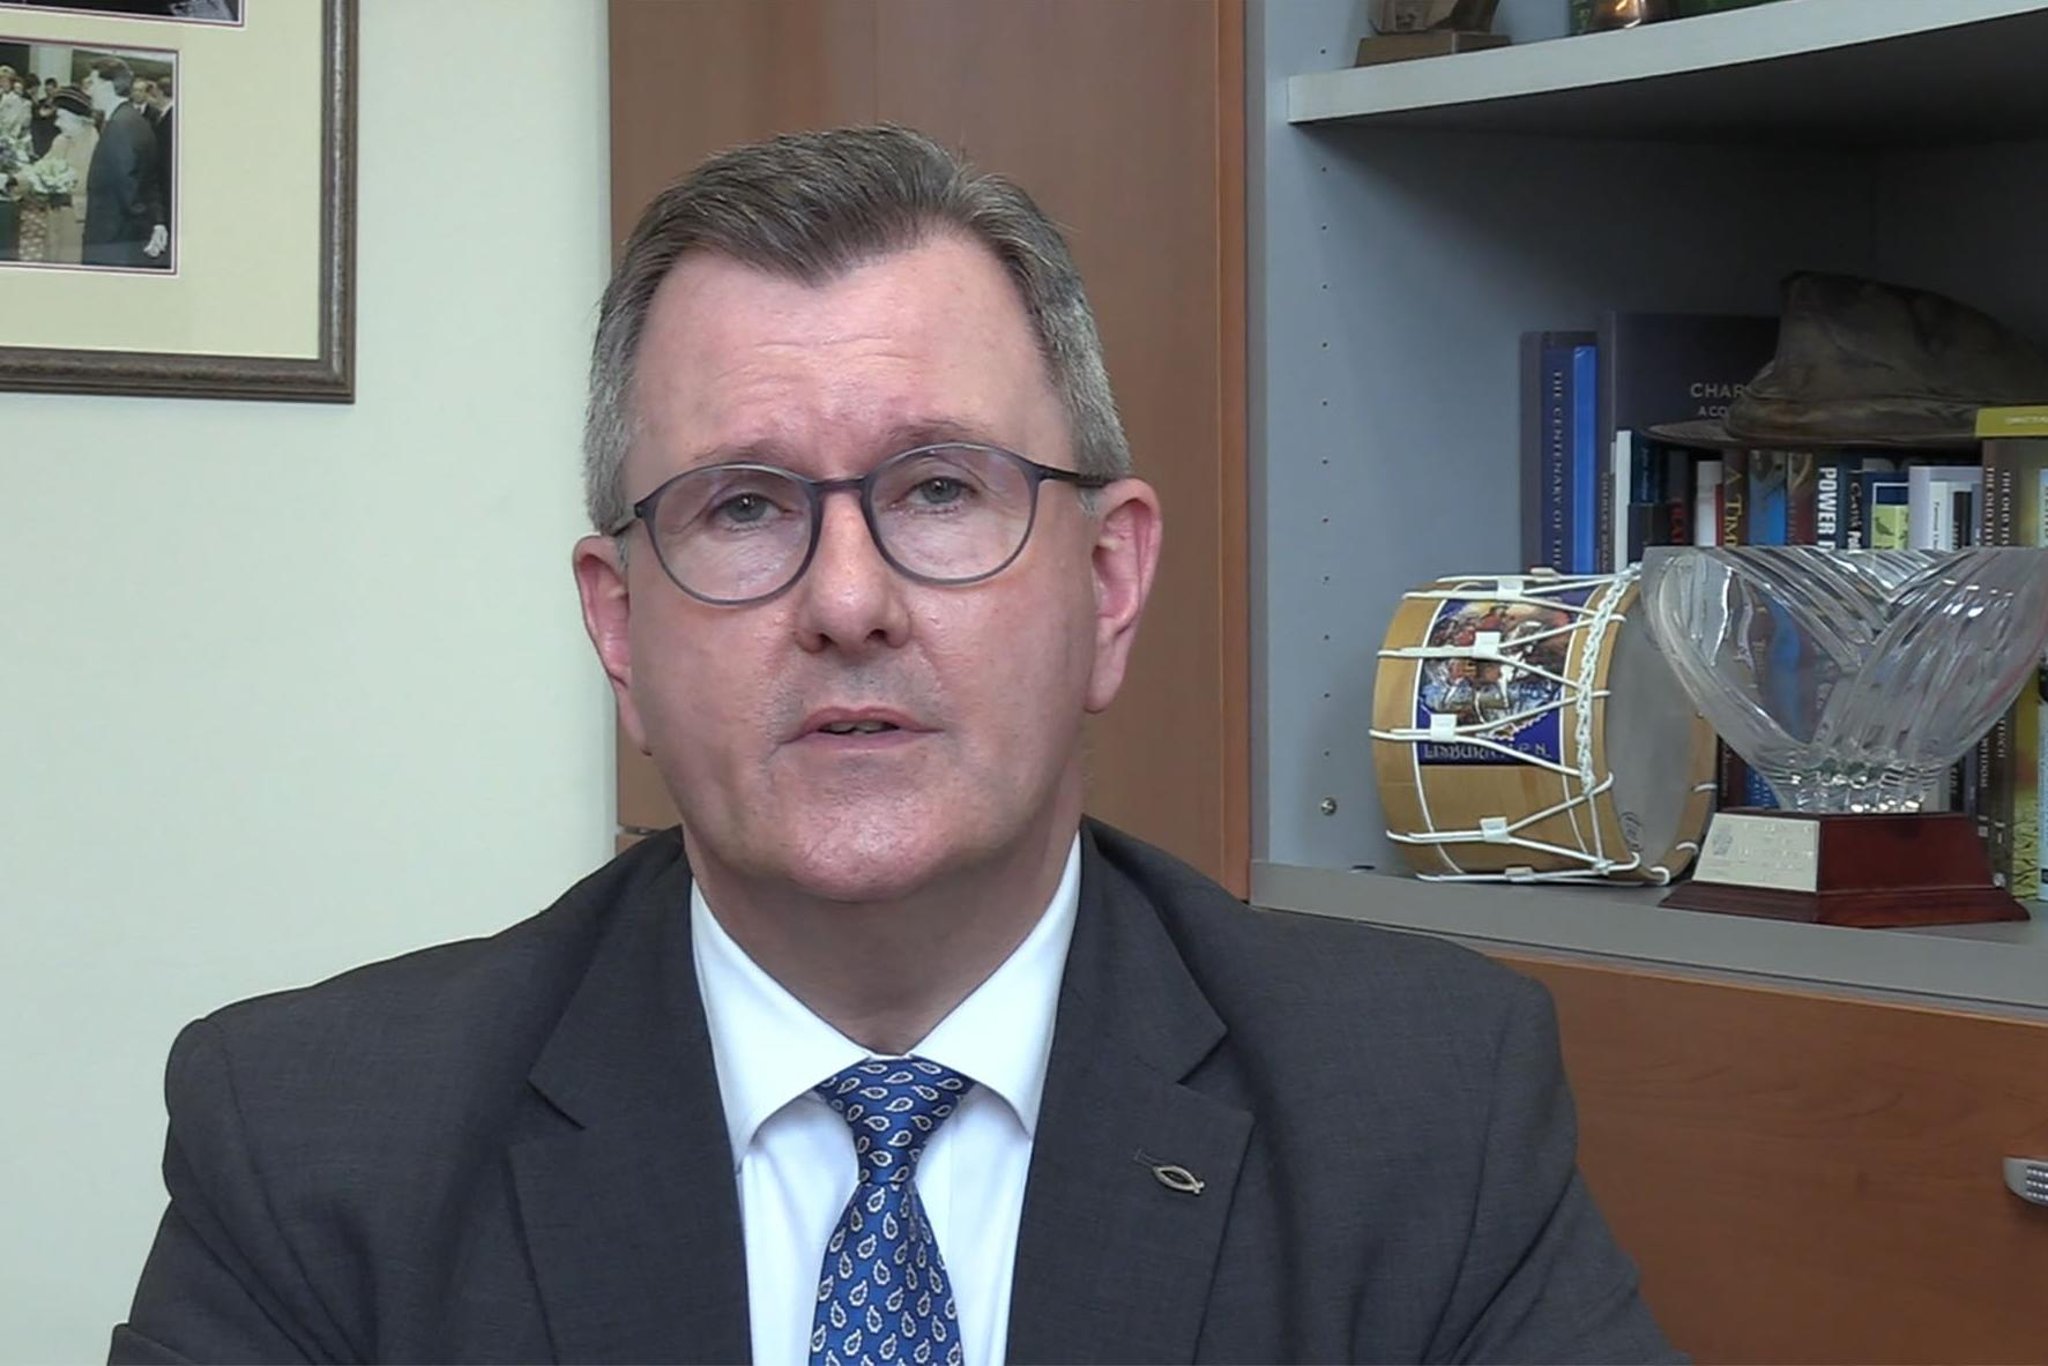 Jeffrey Donaldson video does not address claims that he discussed rejoining UUP